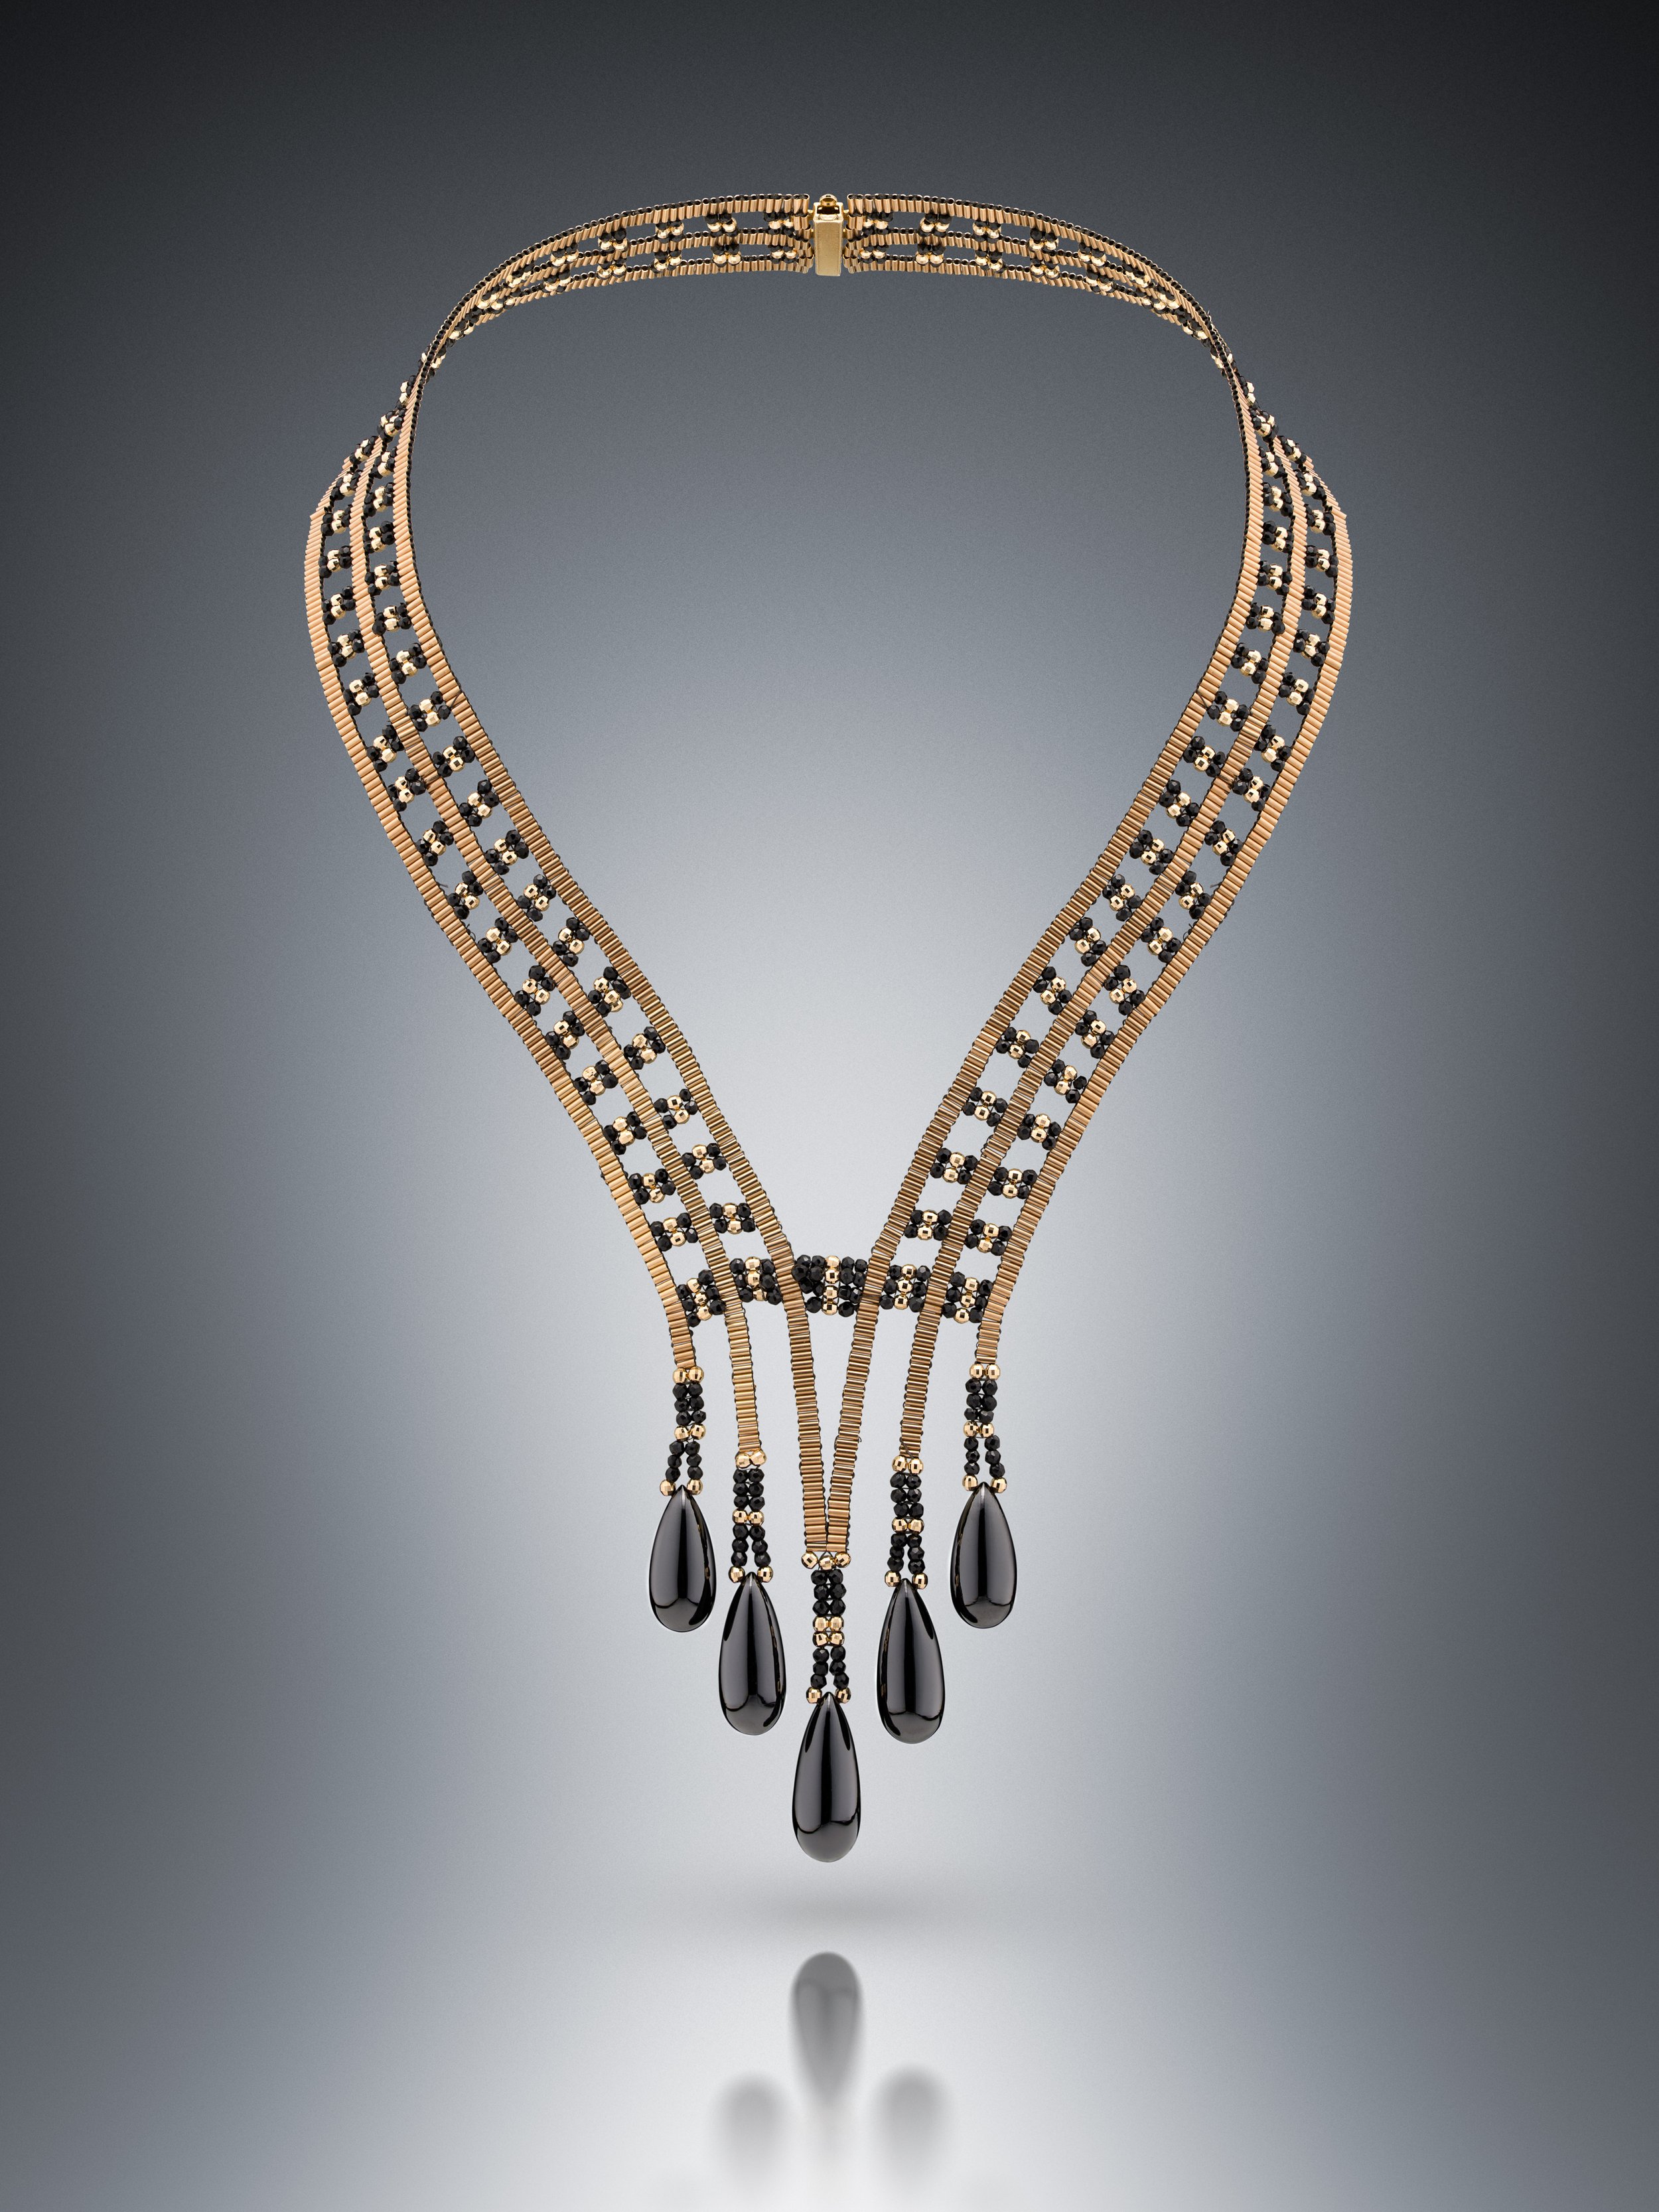 Wedding Necklace.  This neckpiece is hand-woven of black spinel and 14k gold beads.